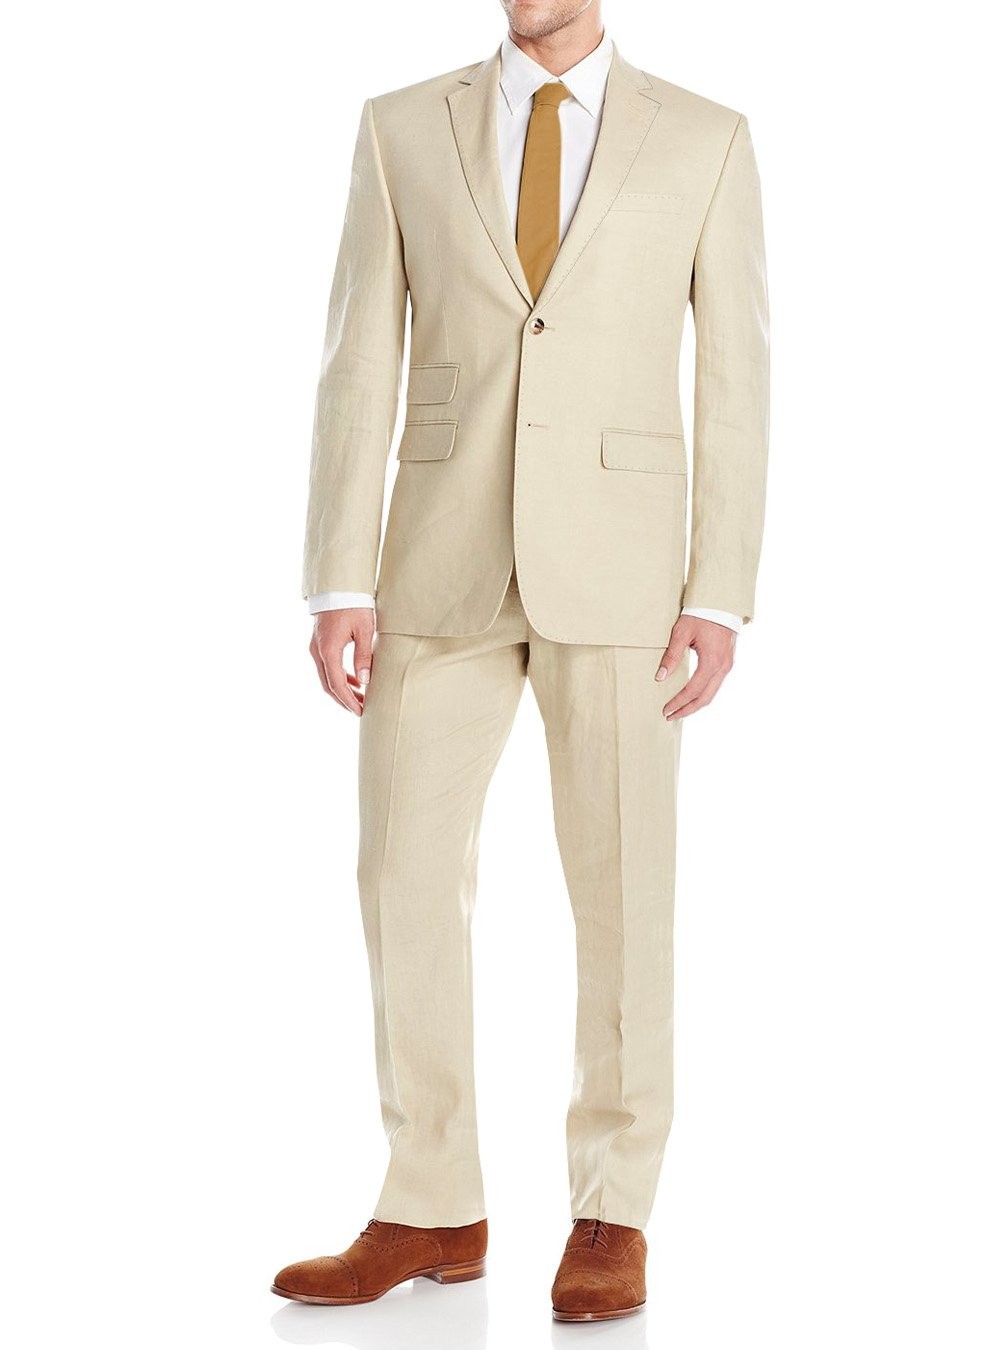 Why Should You Buy a Linen Suit